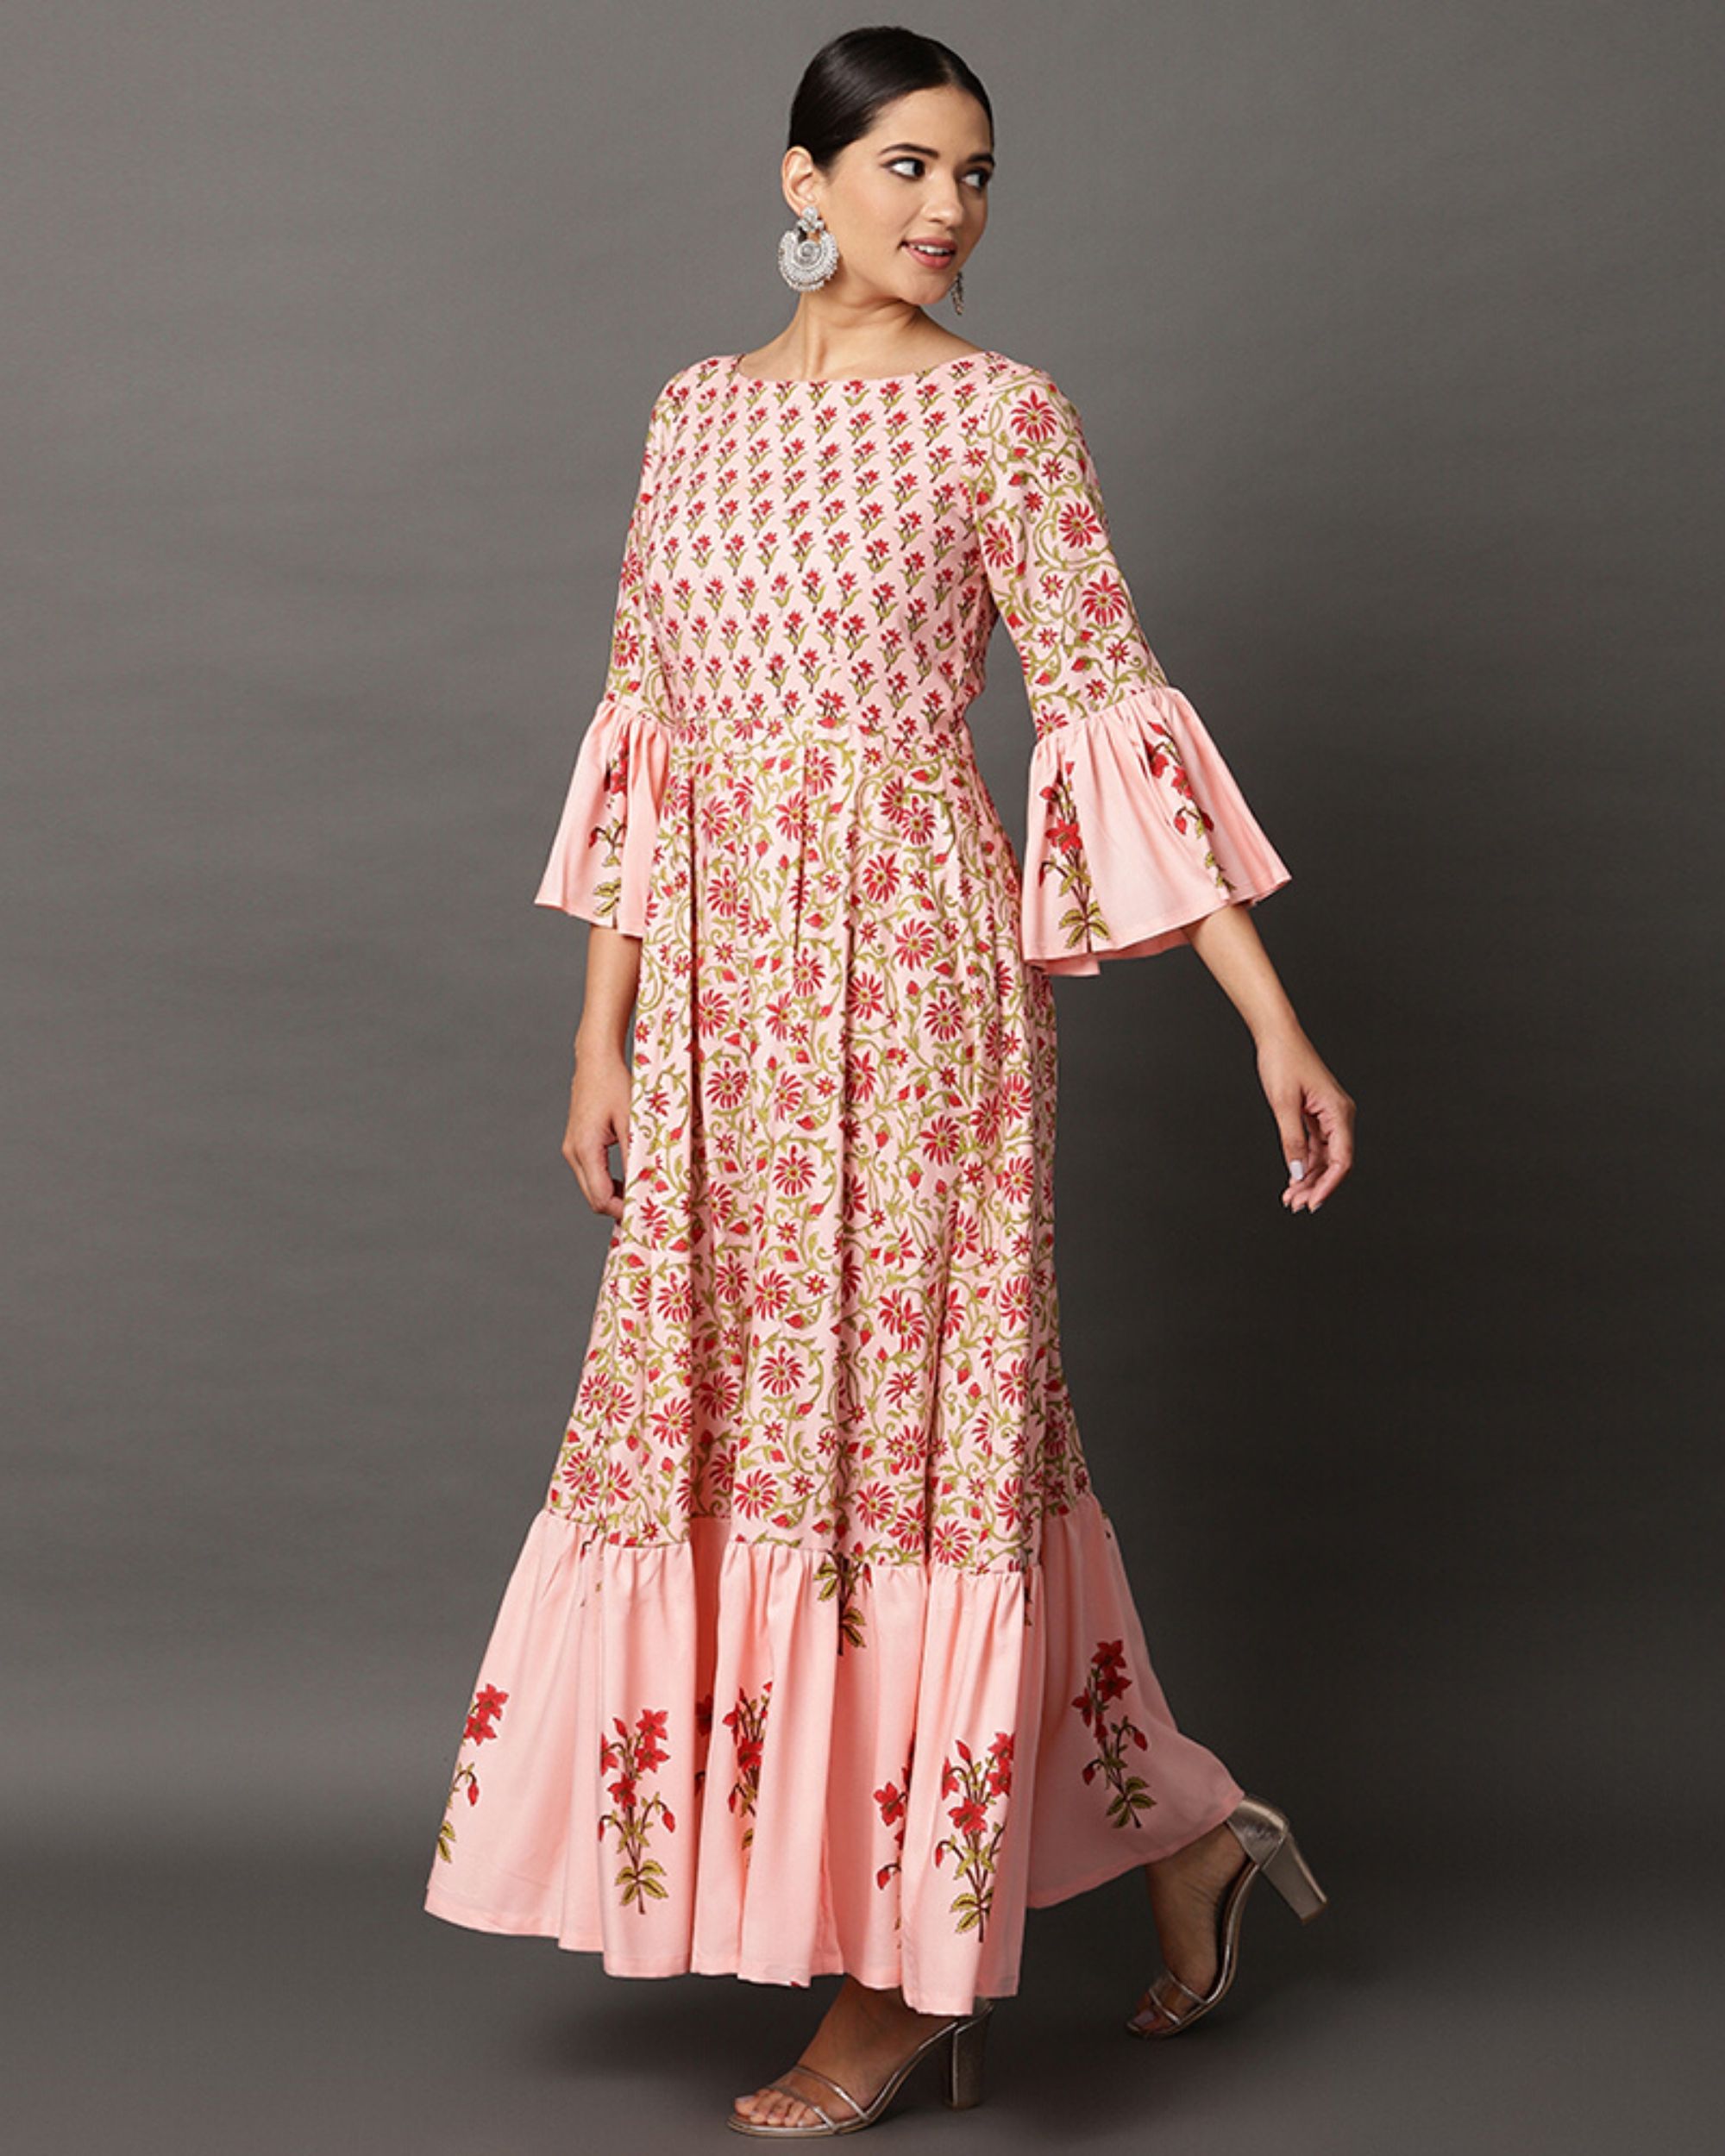 Peach tiered floral ruffled maxi dress by Rivaaj | The Secret Label